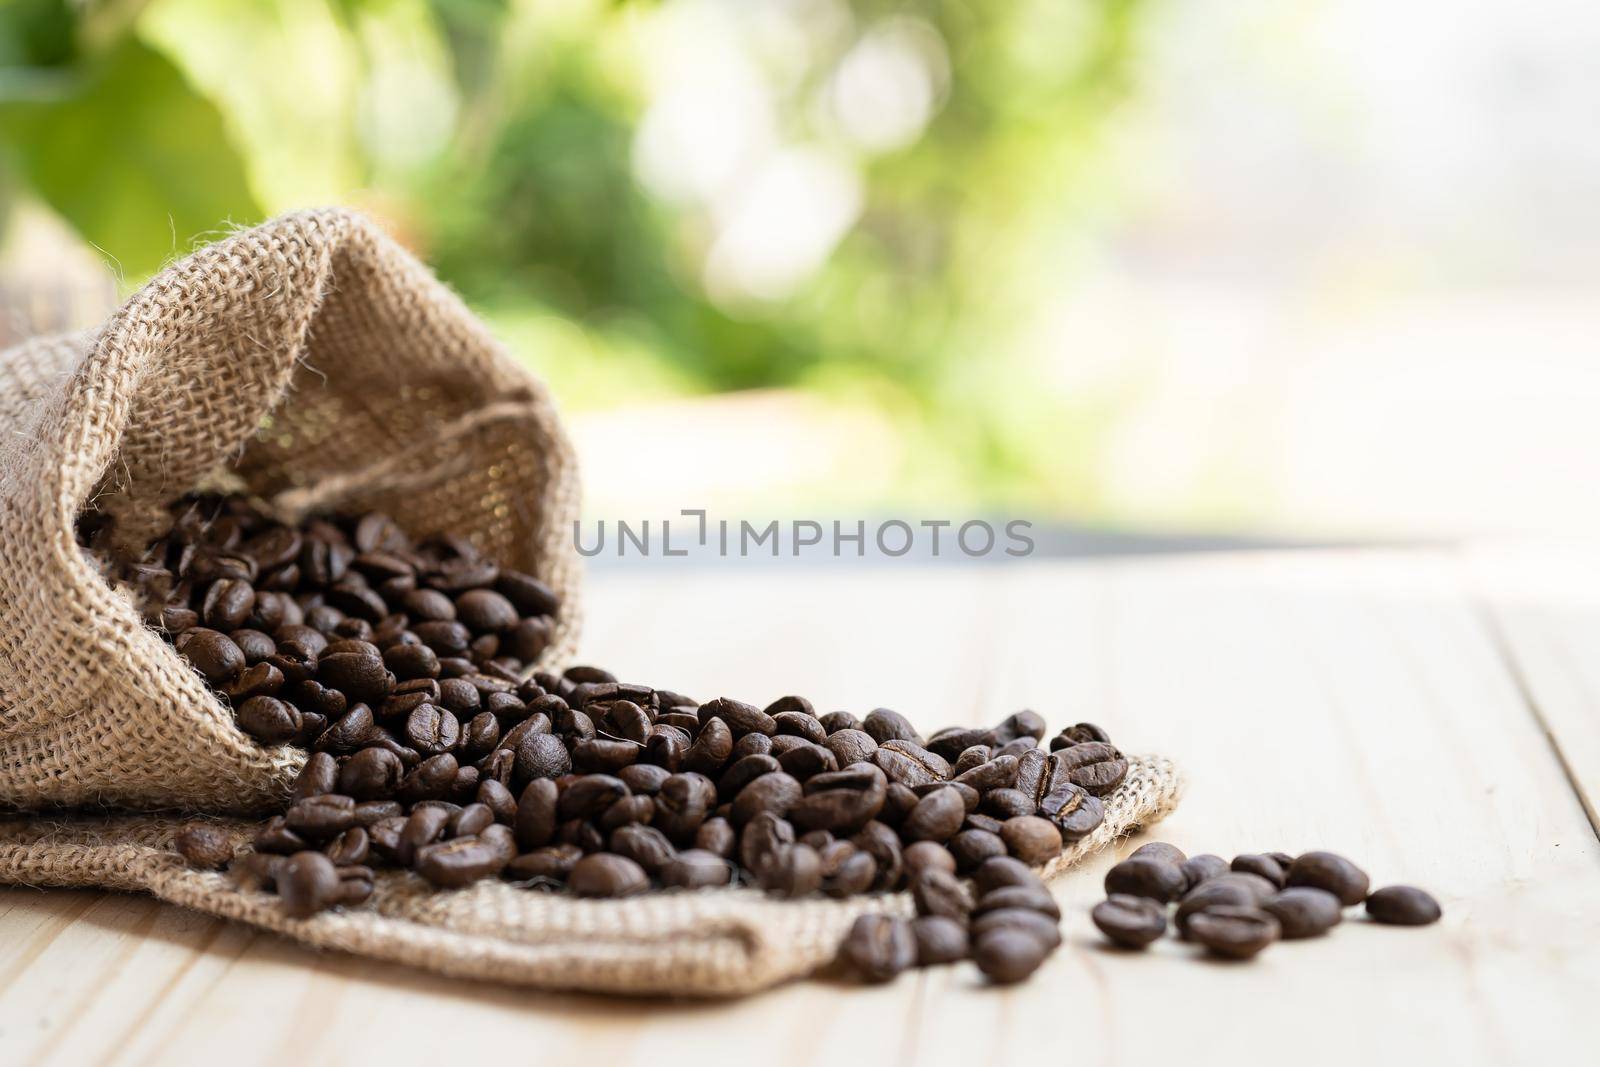 Coffee beans pour out of the sack on the wooden floor in morning. by pamai